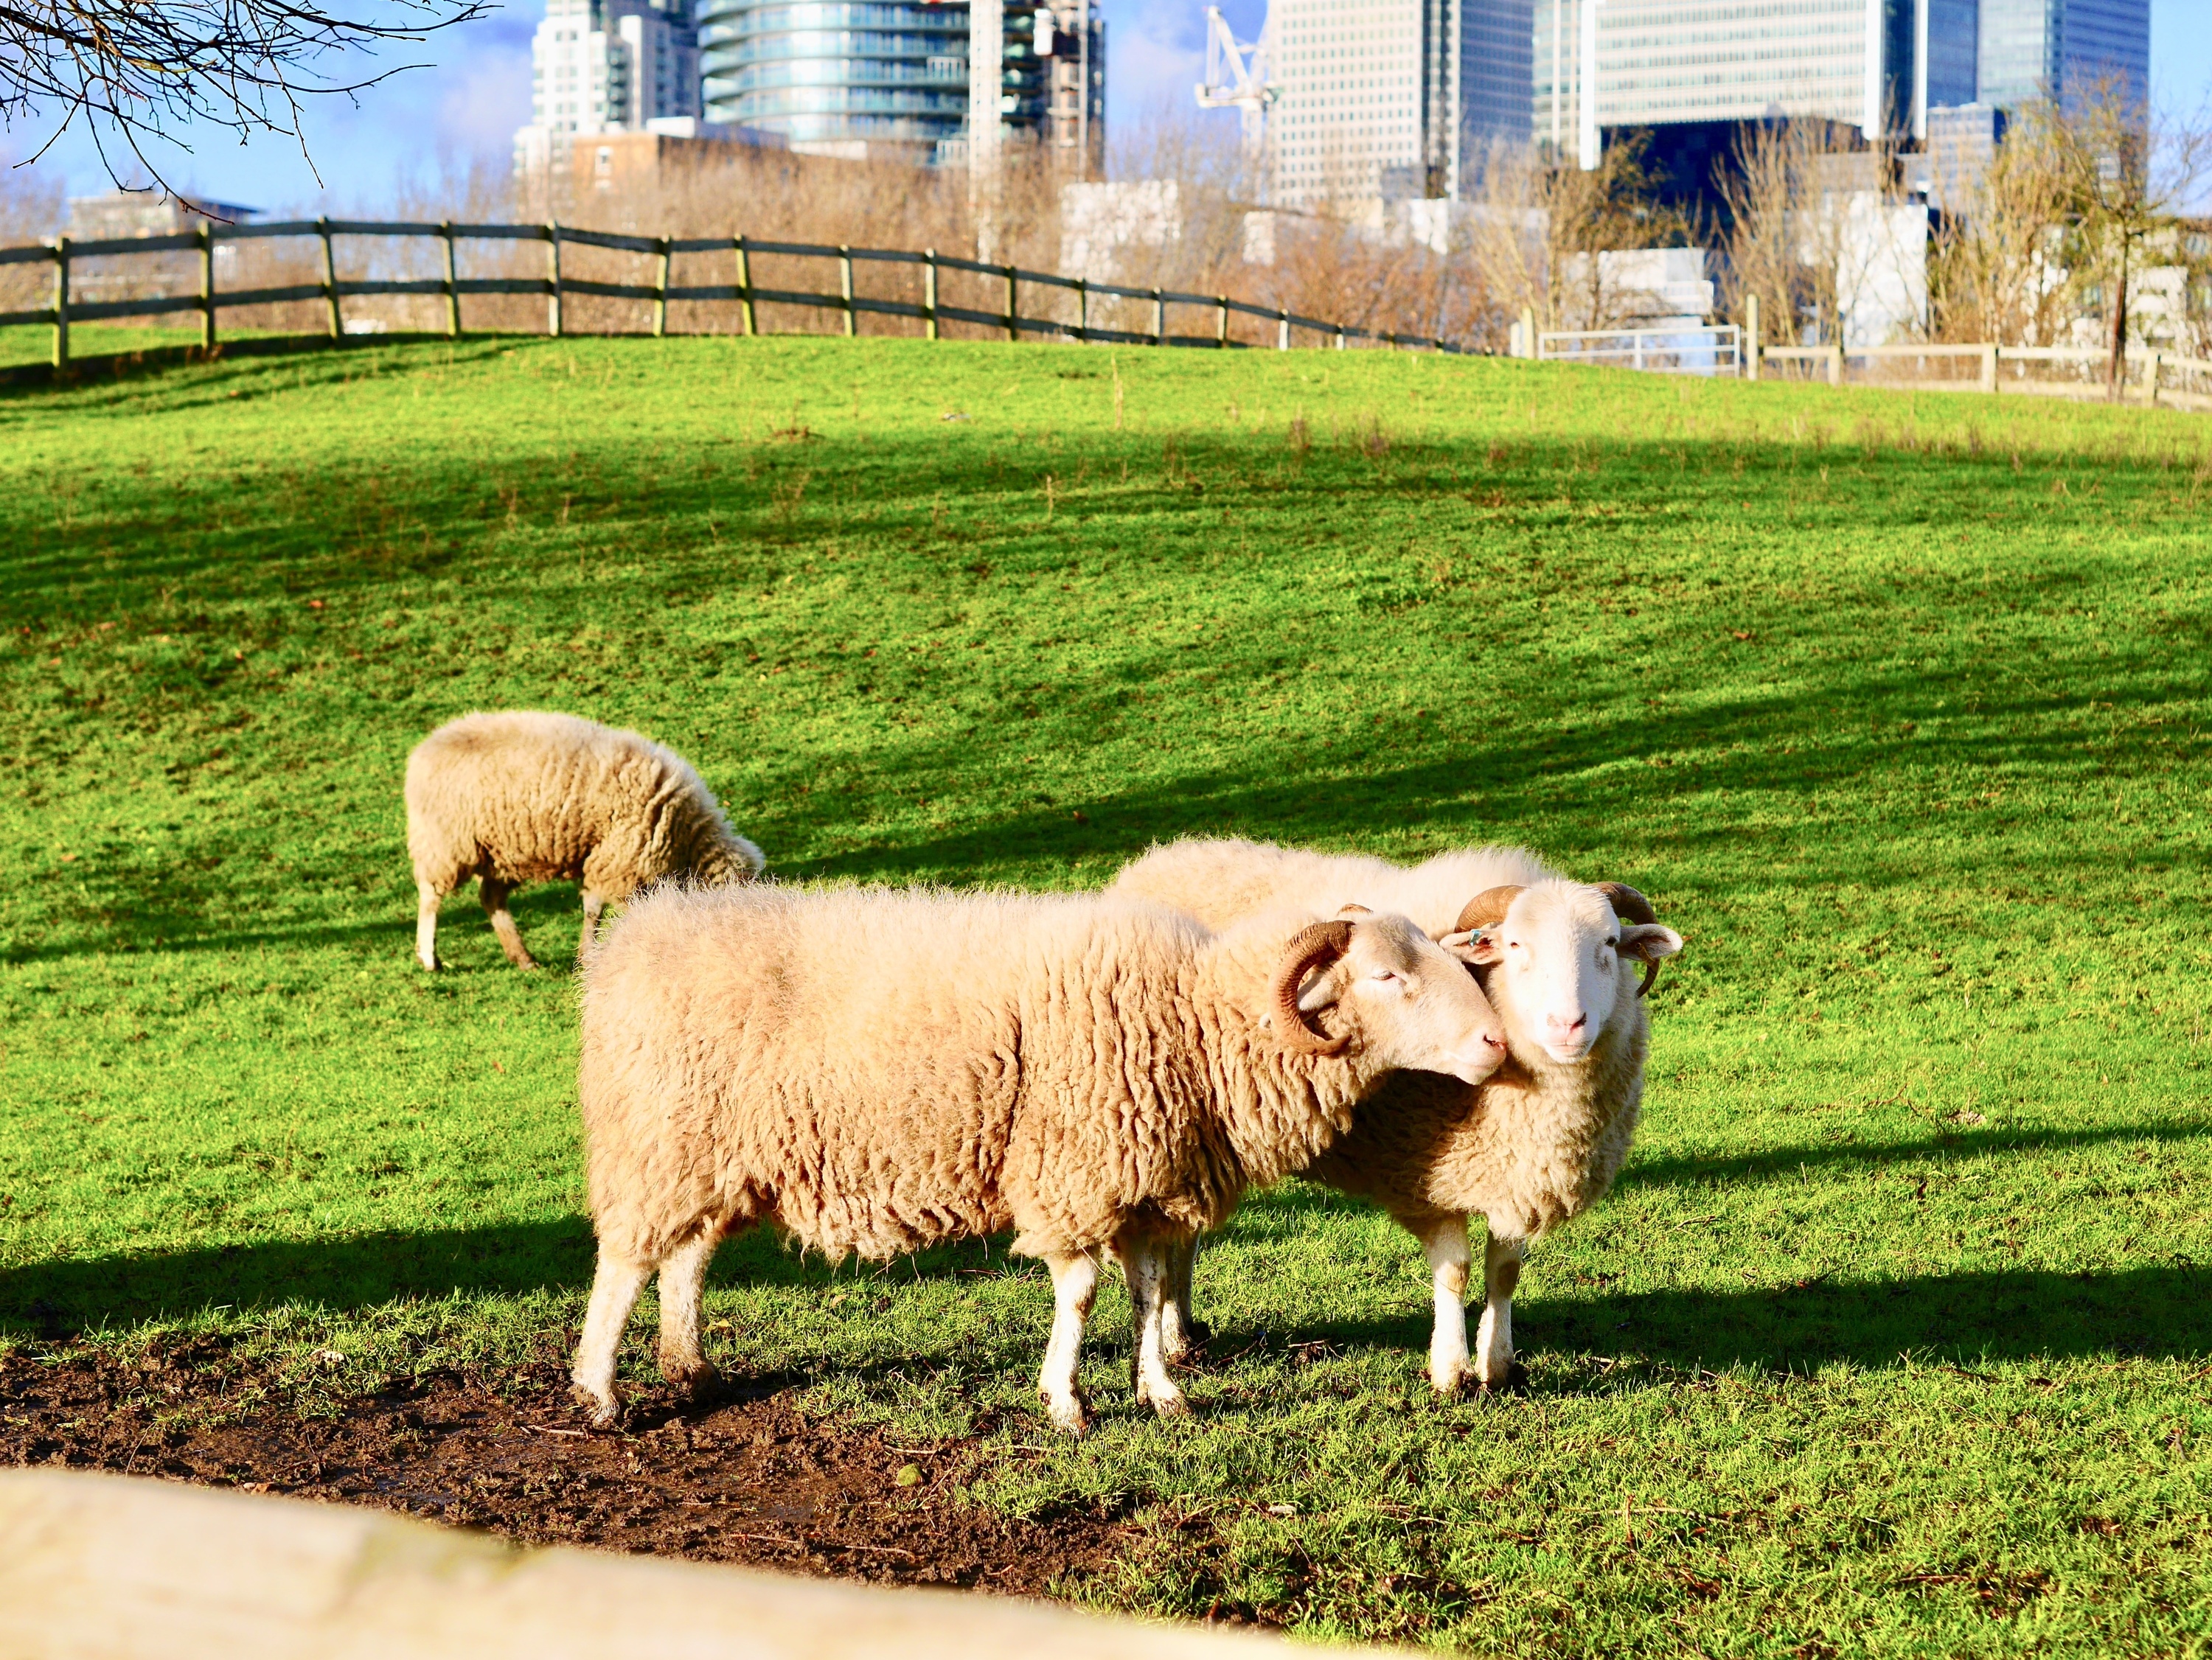 Best City Farms In London For Spotting Super Cute Animals